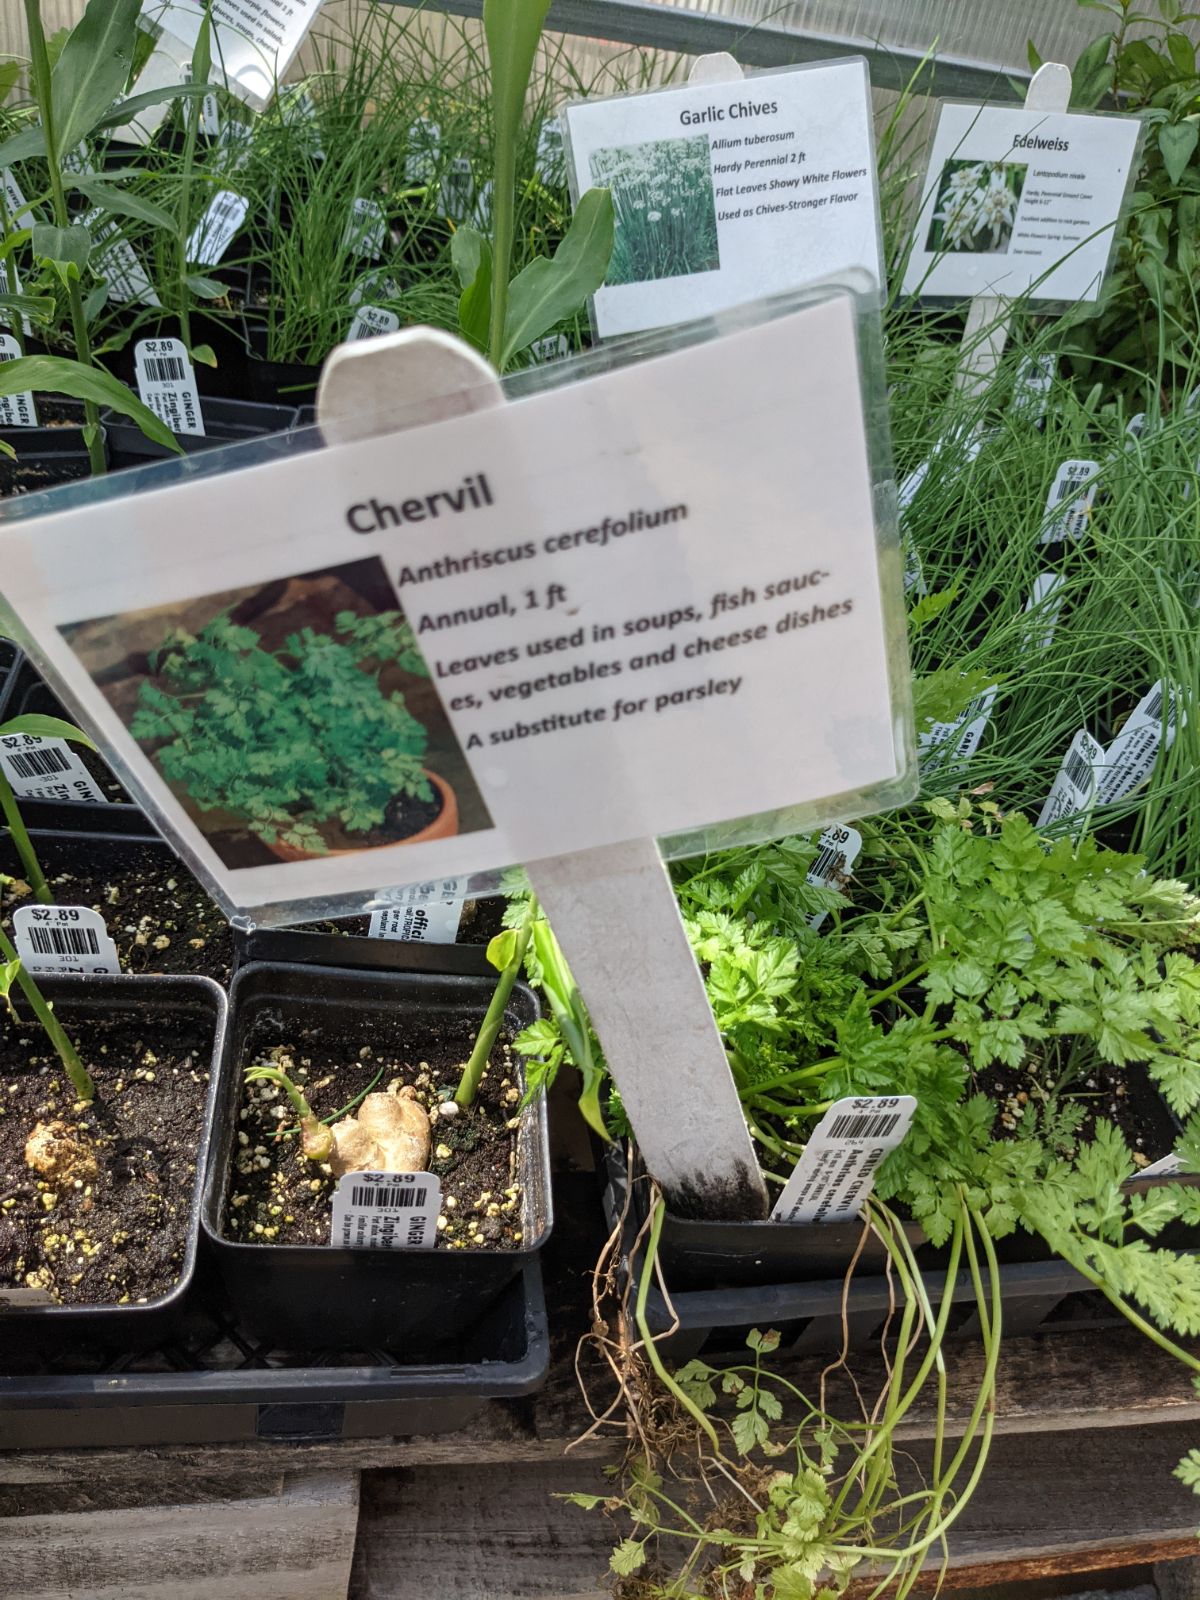 Chervil works as a companion plant for raspberry bushes.